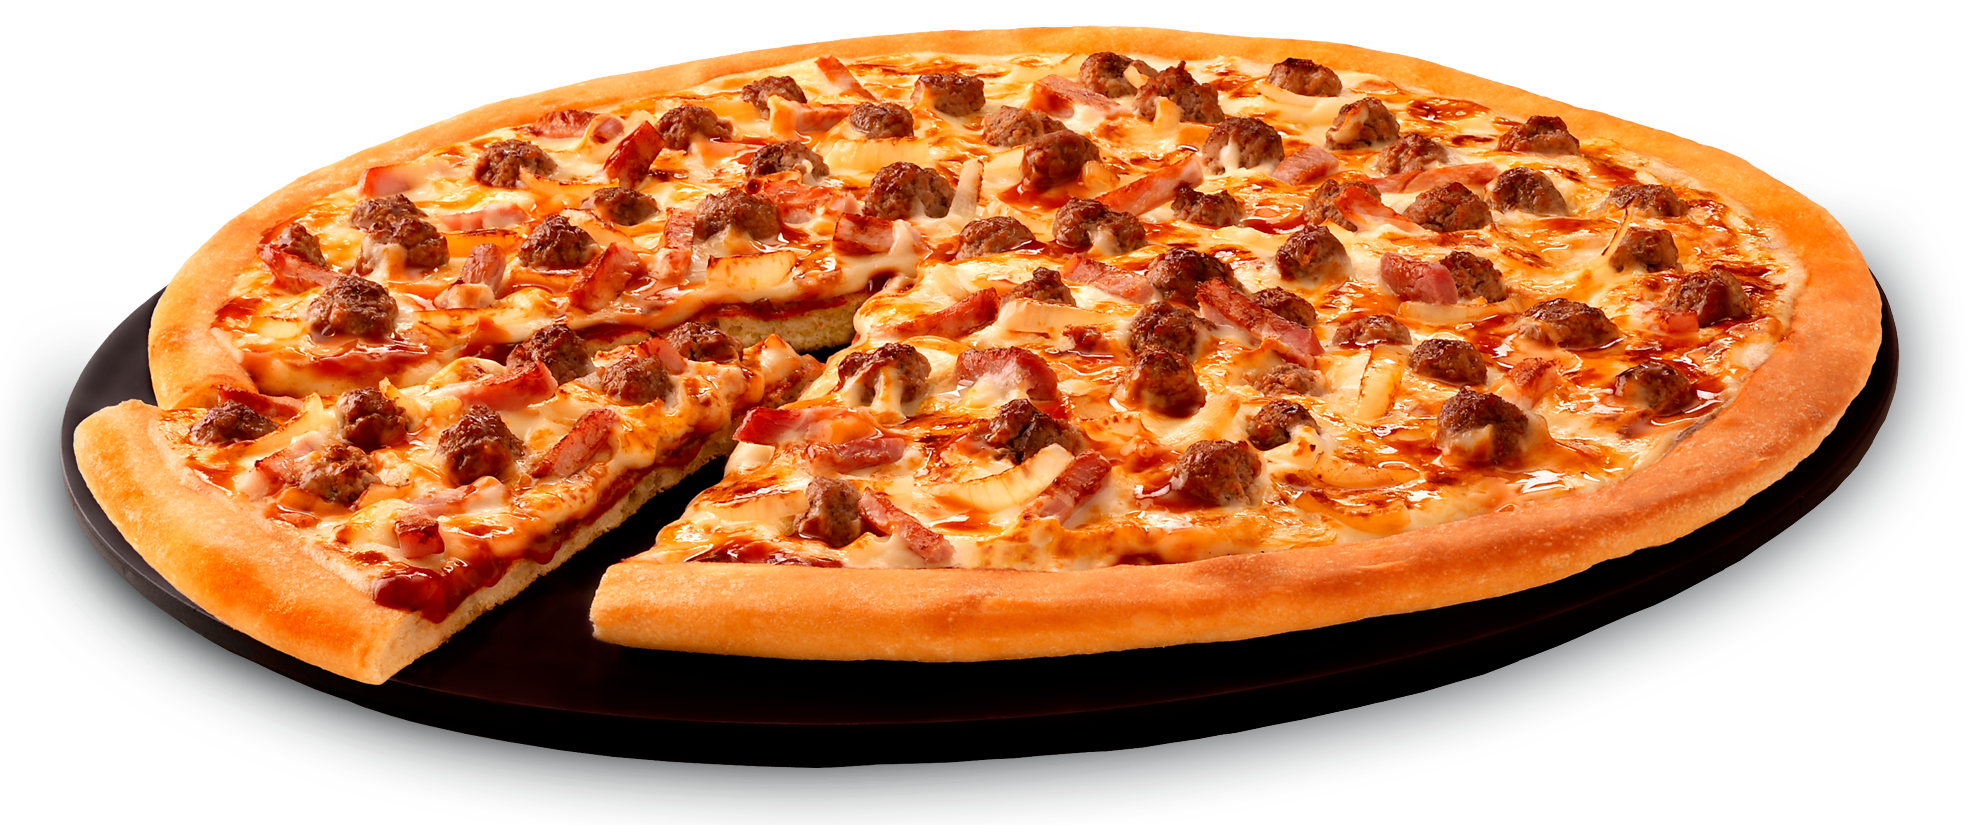 Pizza clipart top view, Pizza top view Transparent FREE for